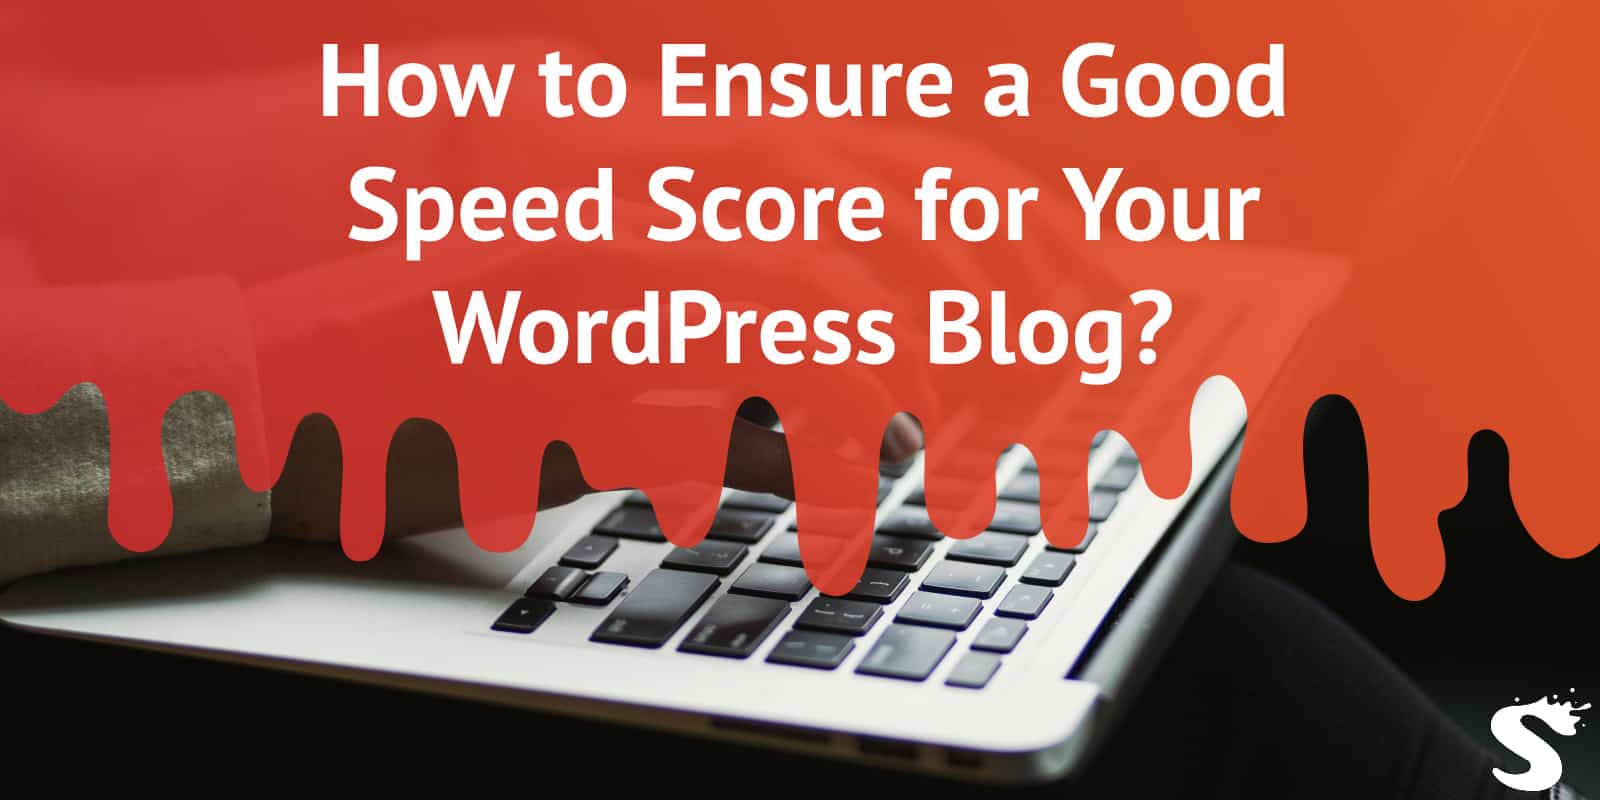 How to Ensure a Good Speed Score for Your WordPress Blog?